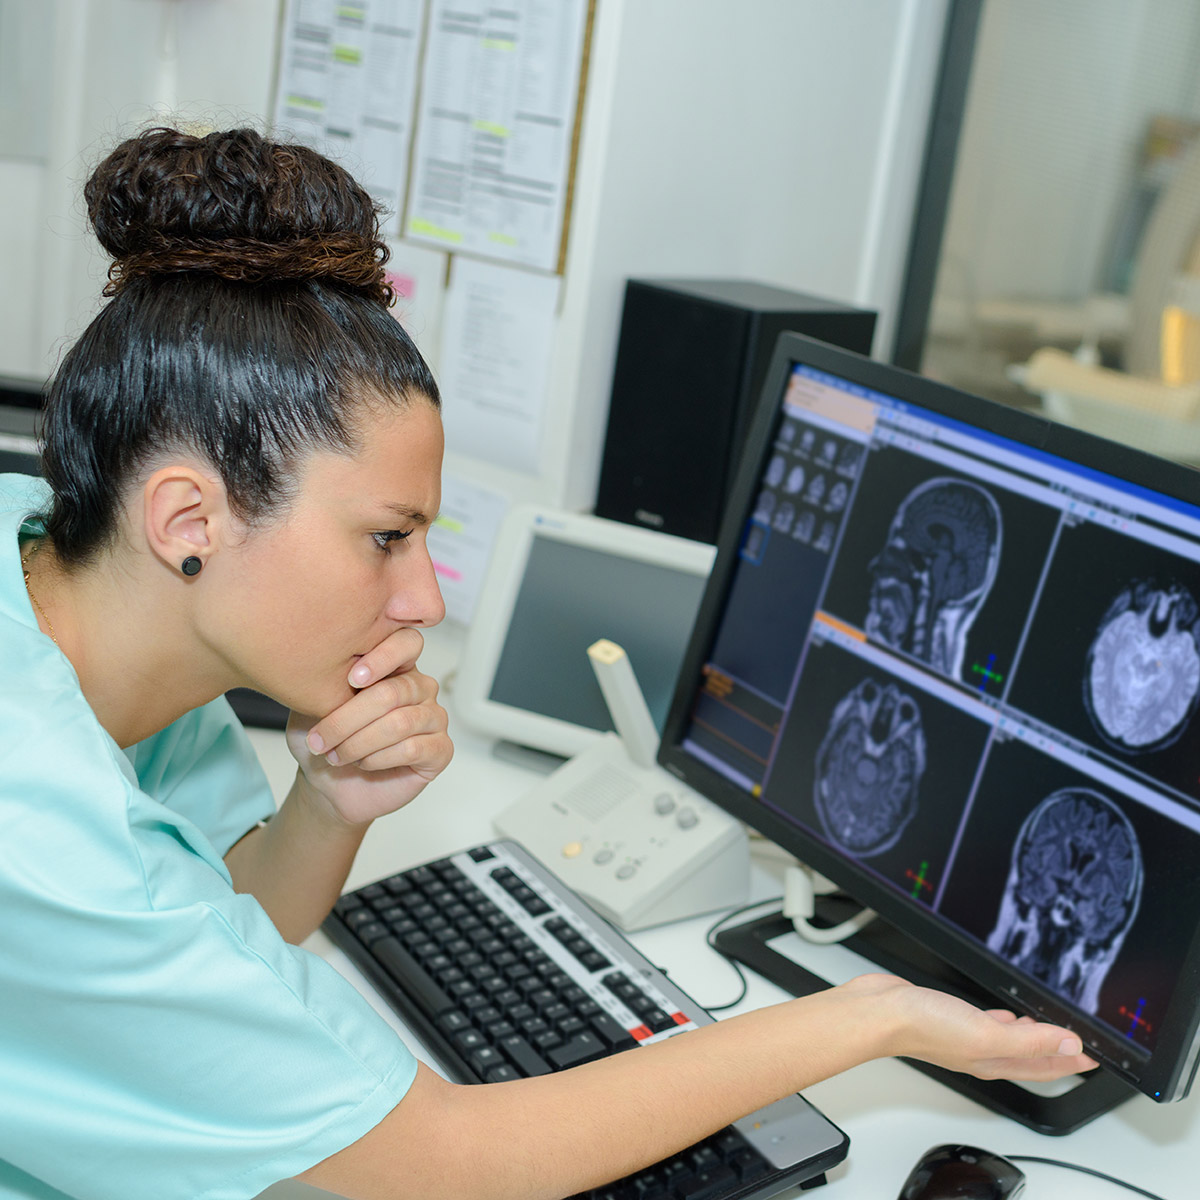 CCD Magnetic Resonance Imaging student studying an MRI